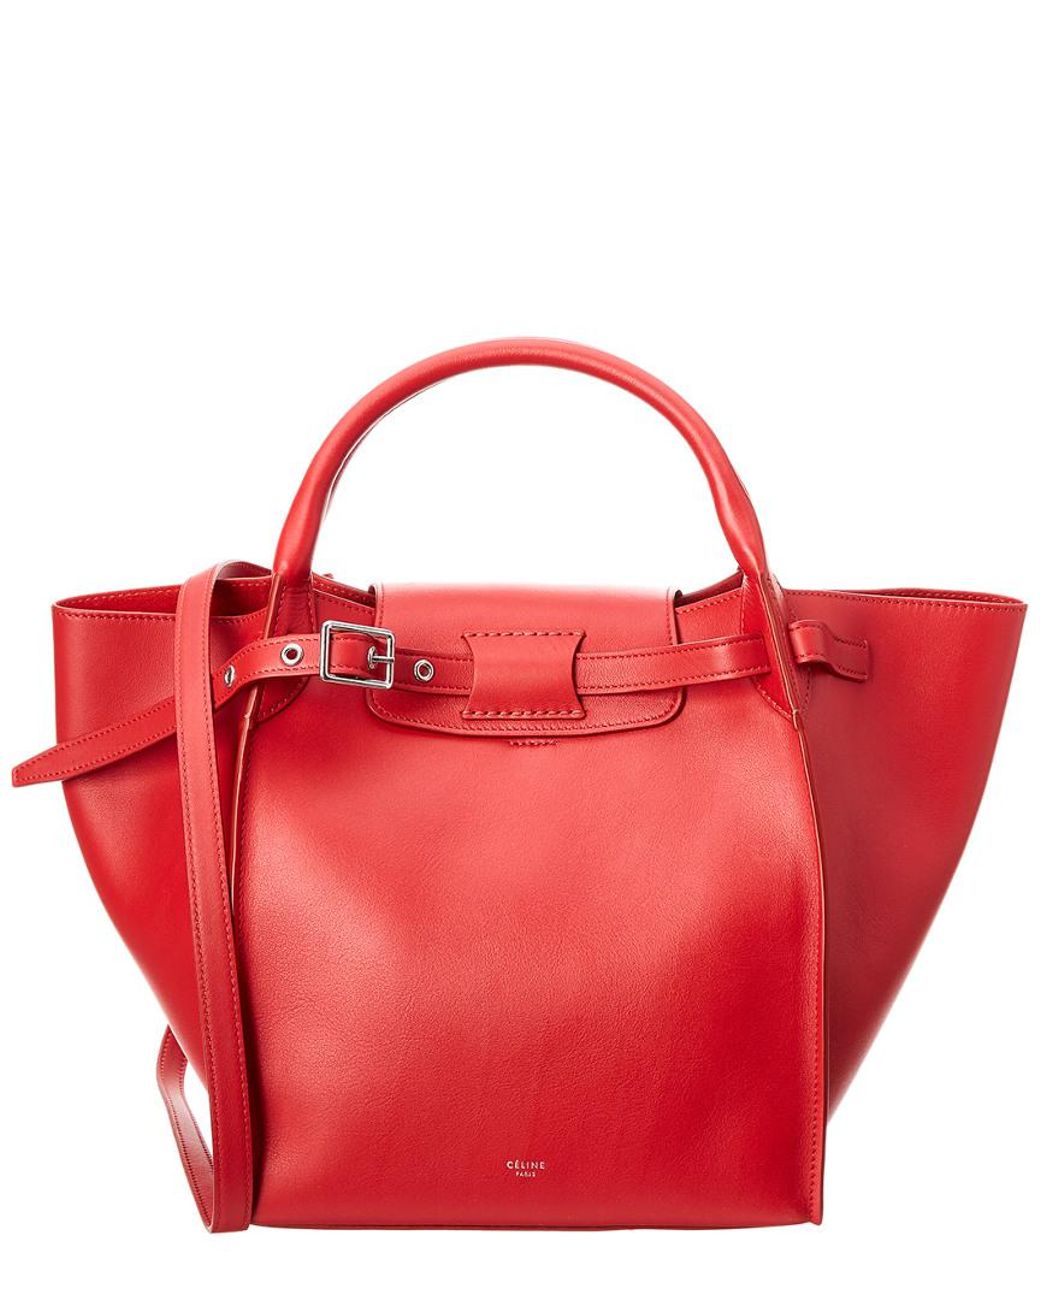 Celine Céline Small Smooth Calfskin Big Bag Tote in Red | Lyst